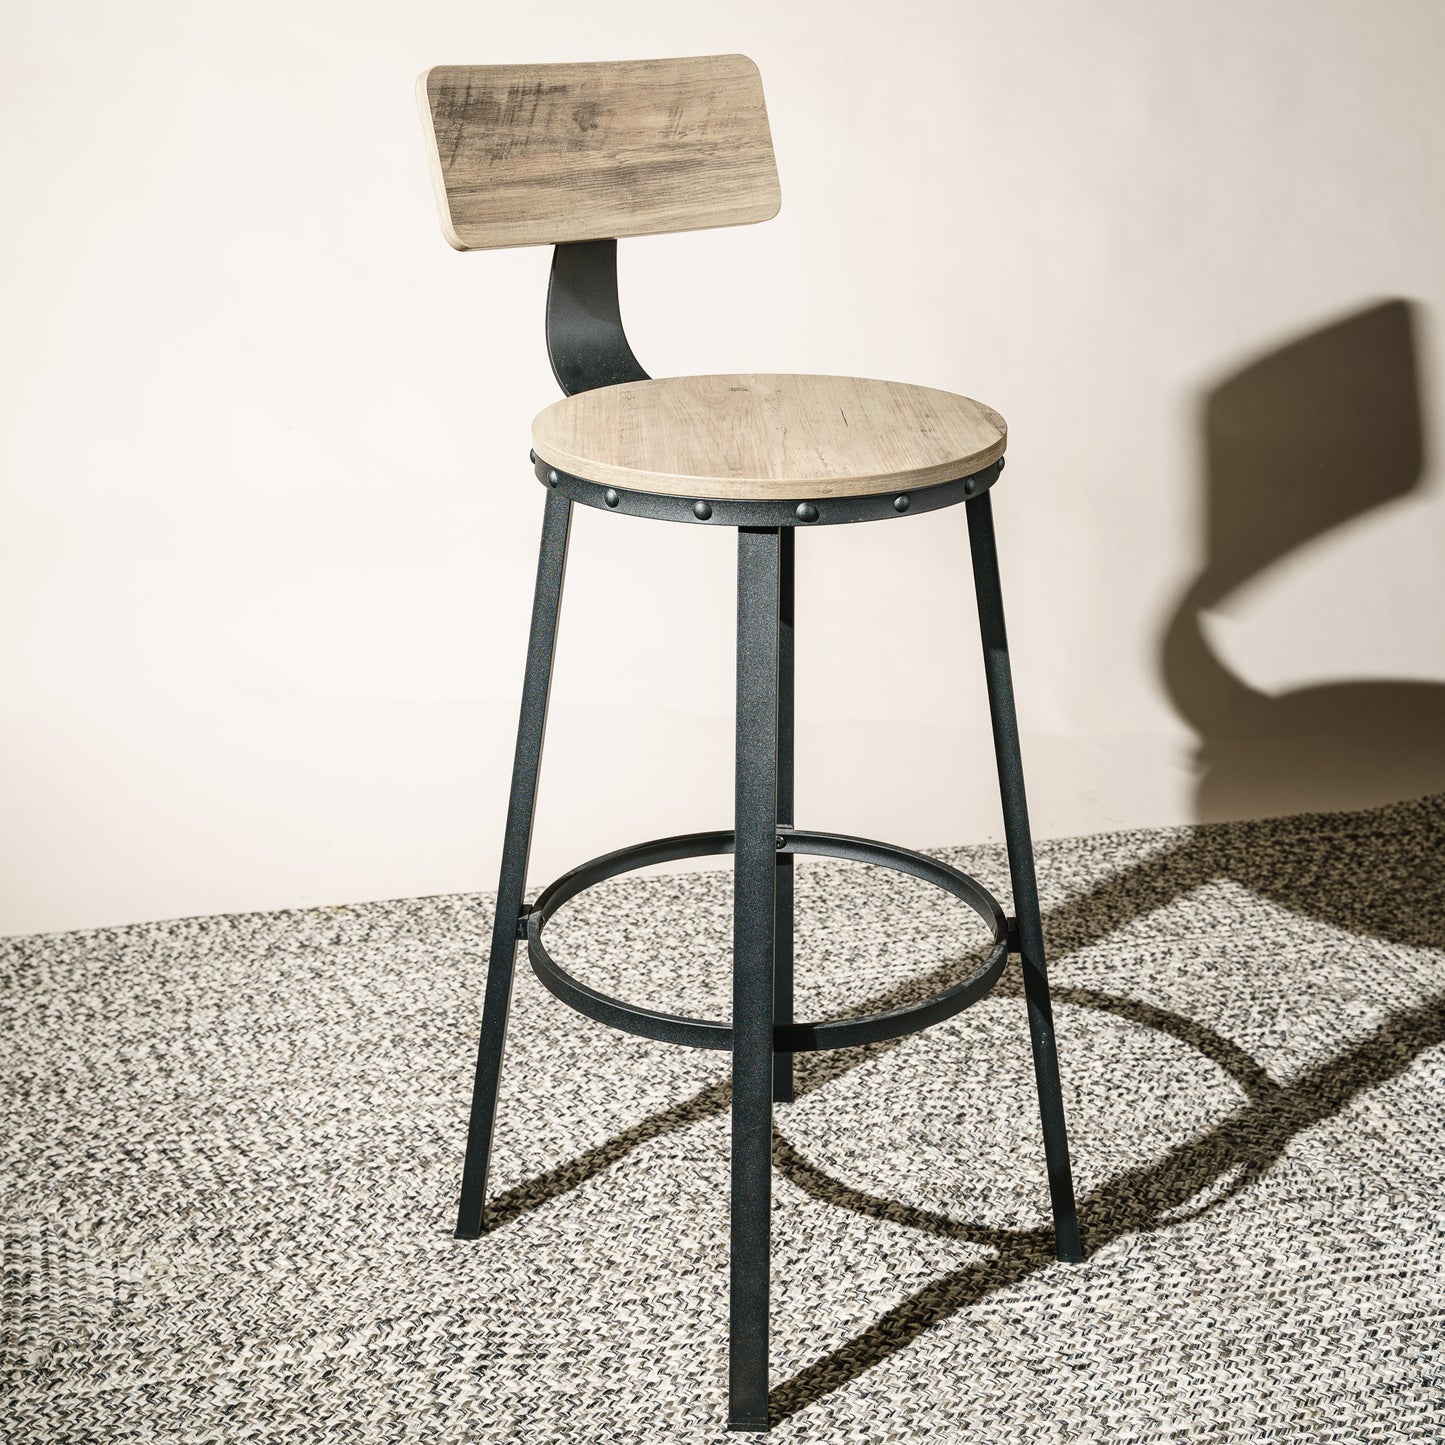 Modern Industrial Bar Stool Chairs - Pair of 2